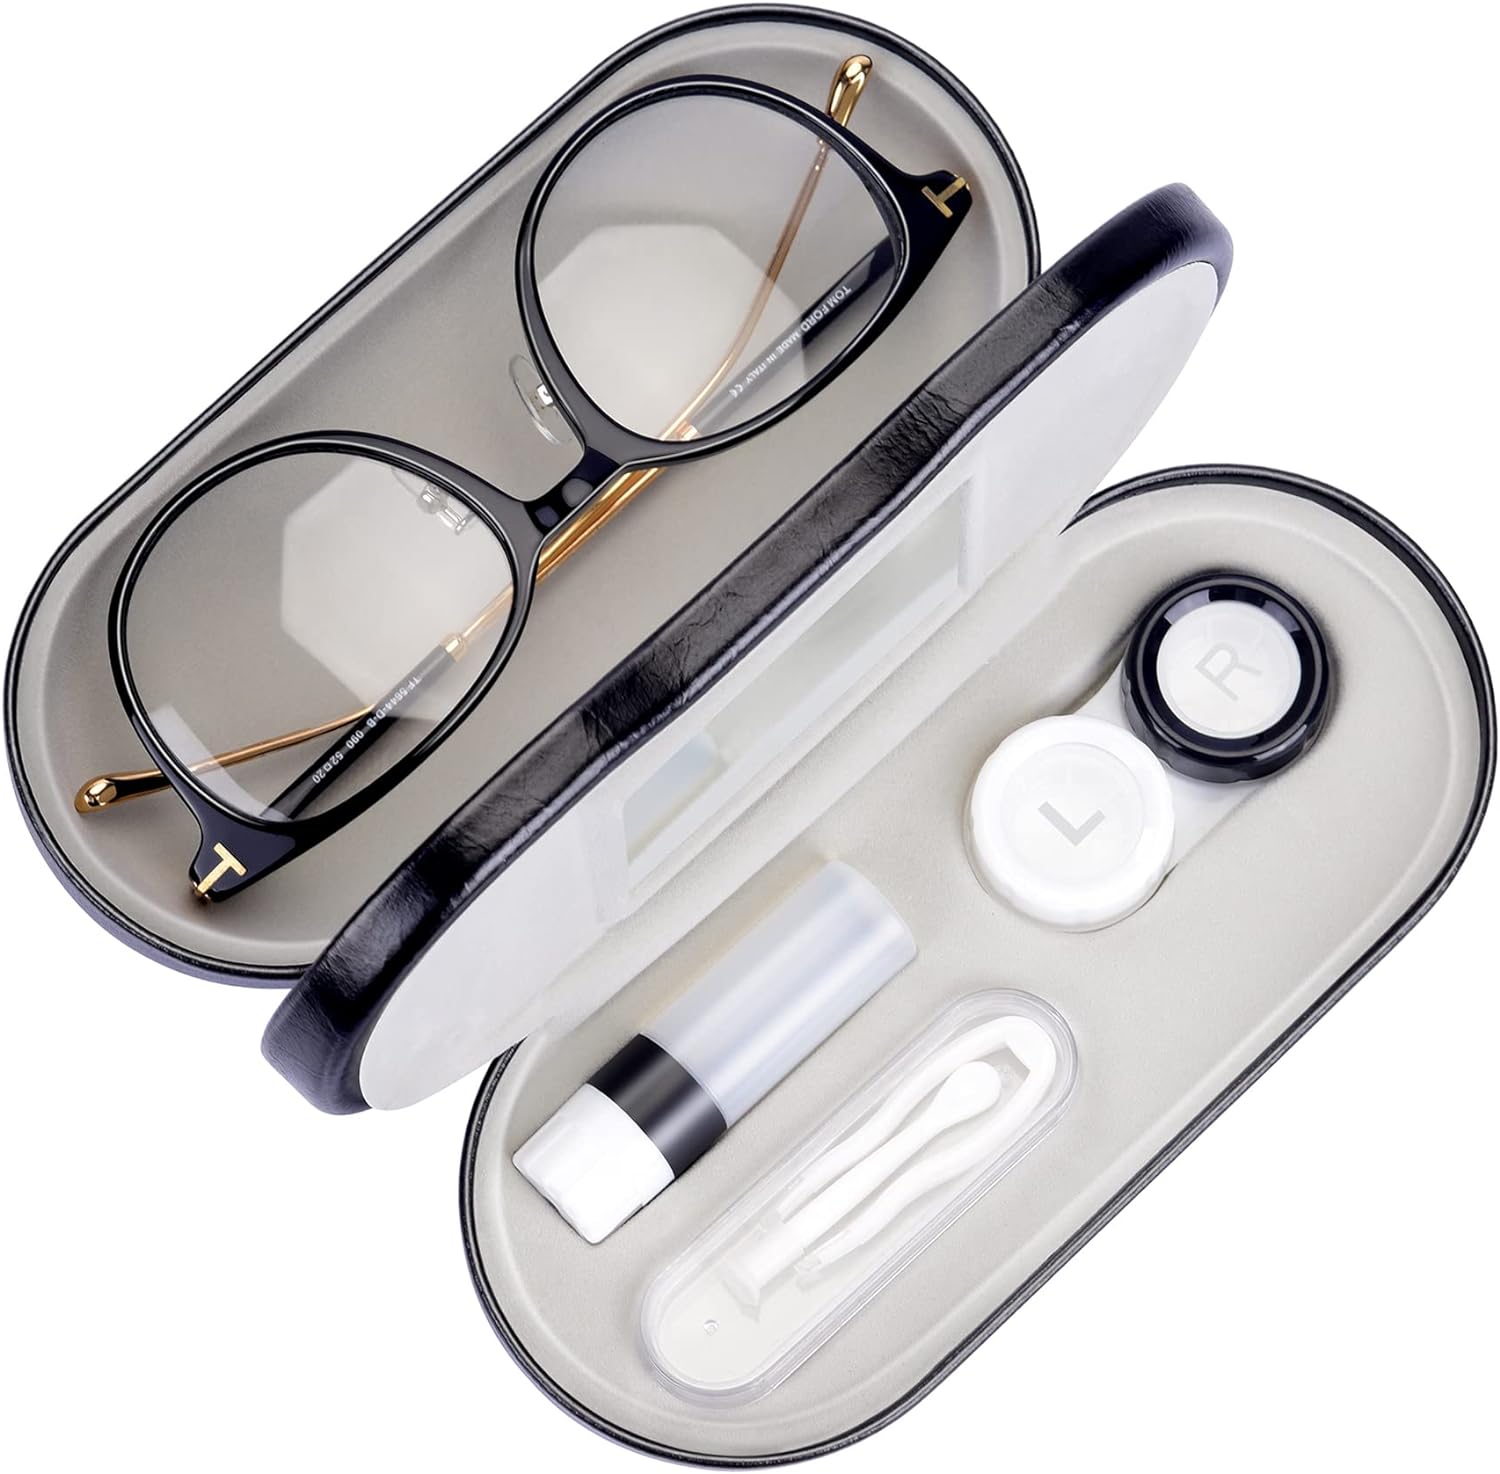 2 in 1 Double Sided Portable Contact Lens Case and Glasses Case with Built-in Mirror